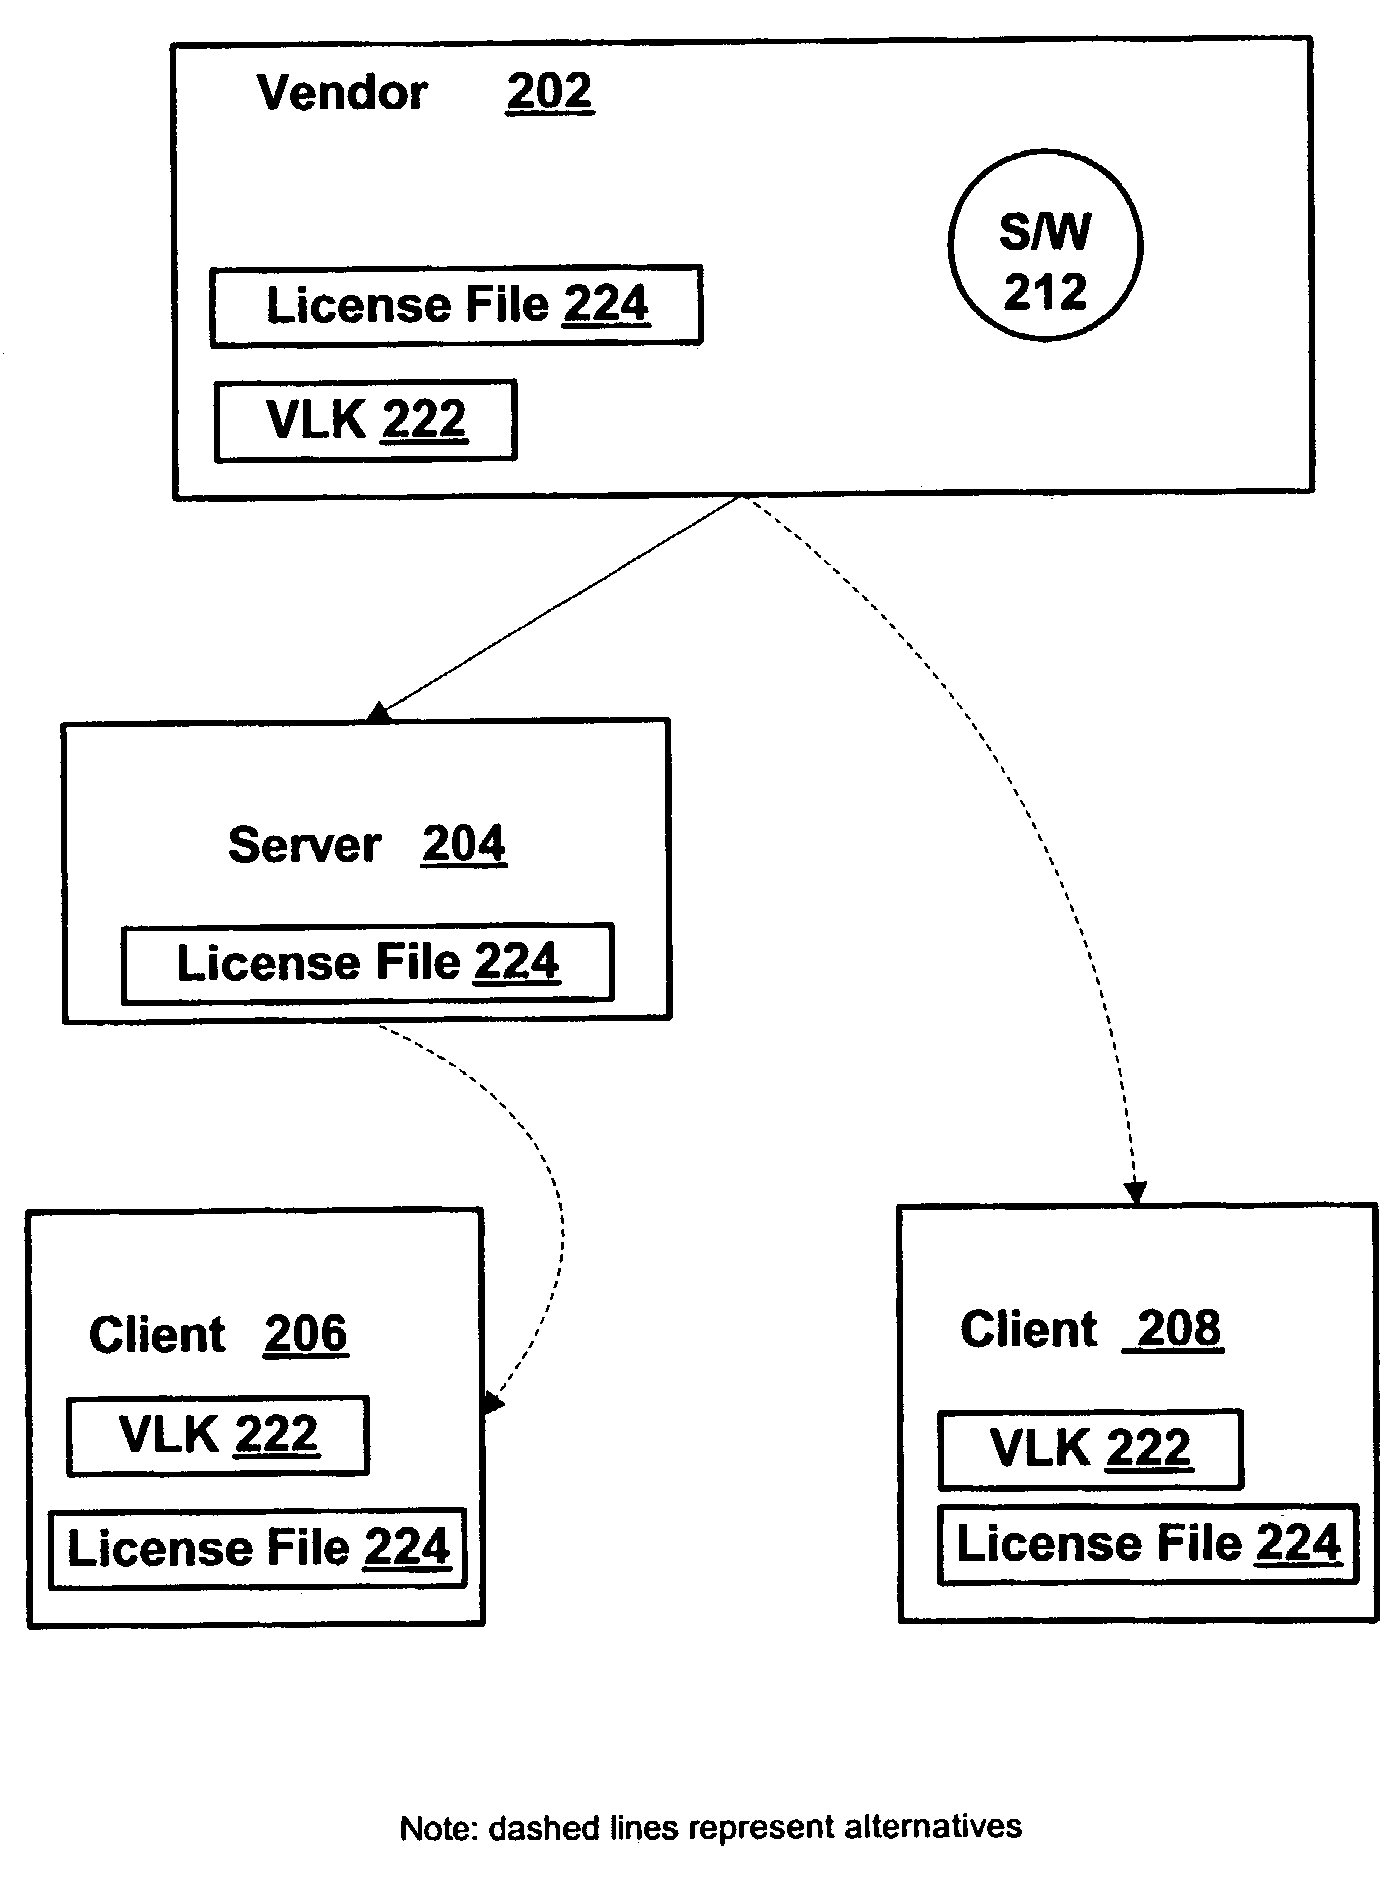 Systems and methods for deterring software piracy in a volume license environment